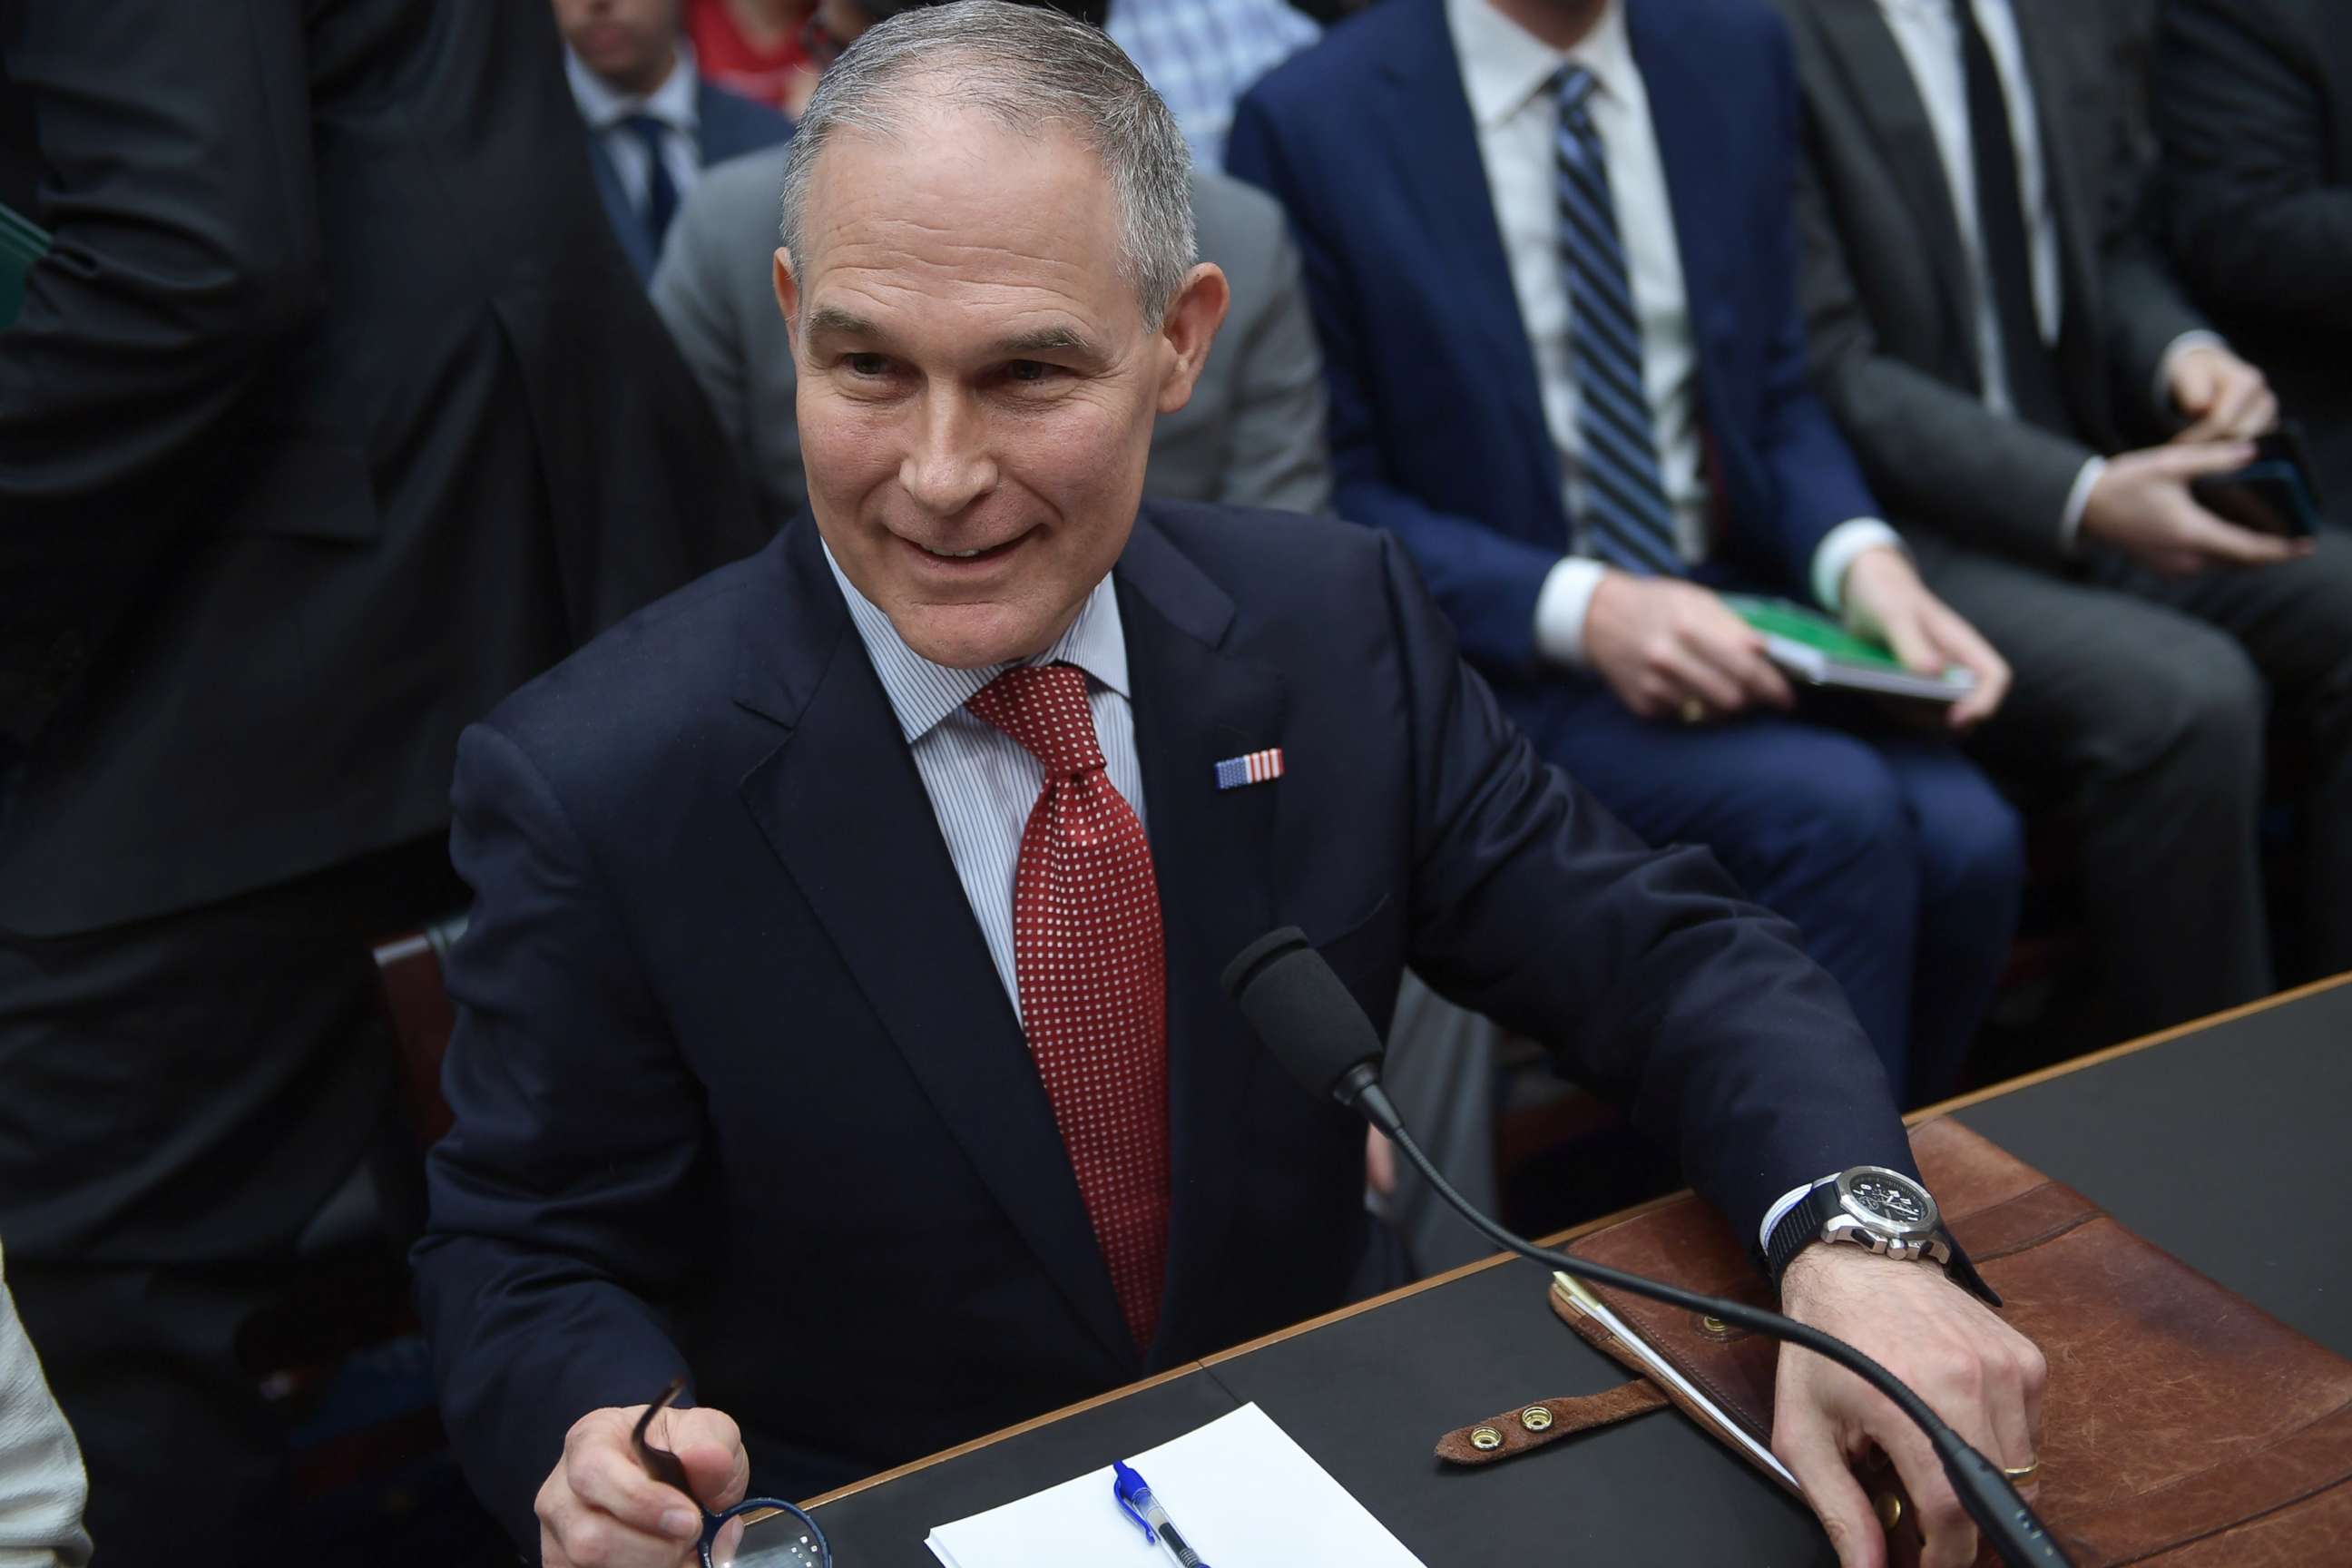 PHOTO: Environmental Protection Agency (EPA) chief Scott Pruitt arrives to testify before the House Energy and Commerce Committee after ethics scandals April 26, 2018 on Capitol Hill in Washington,D.C.